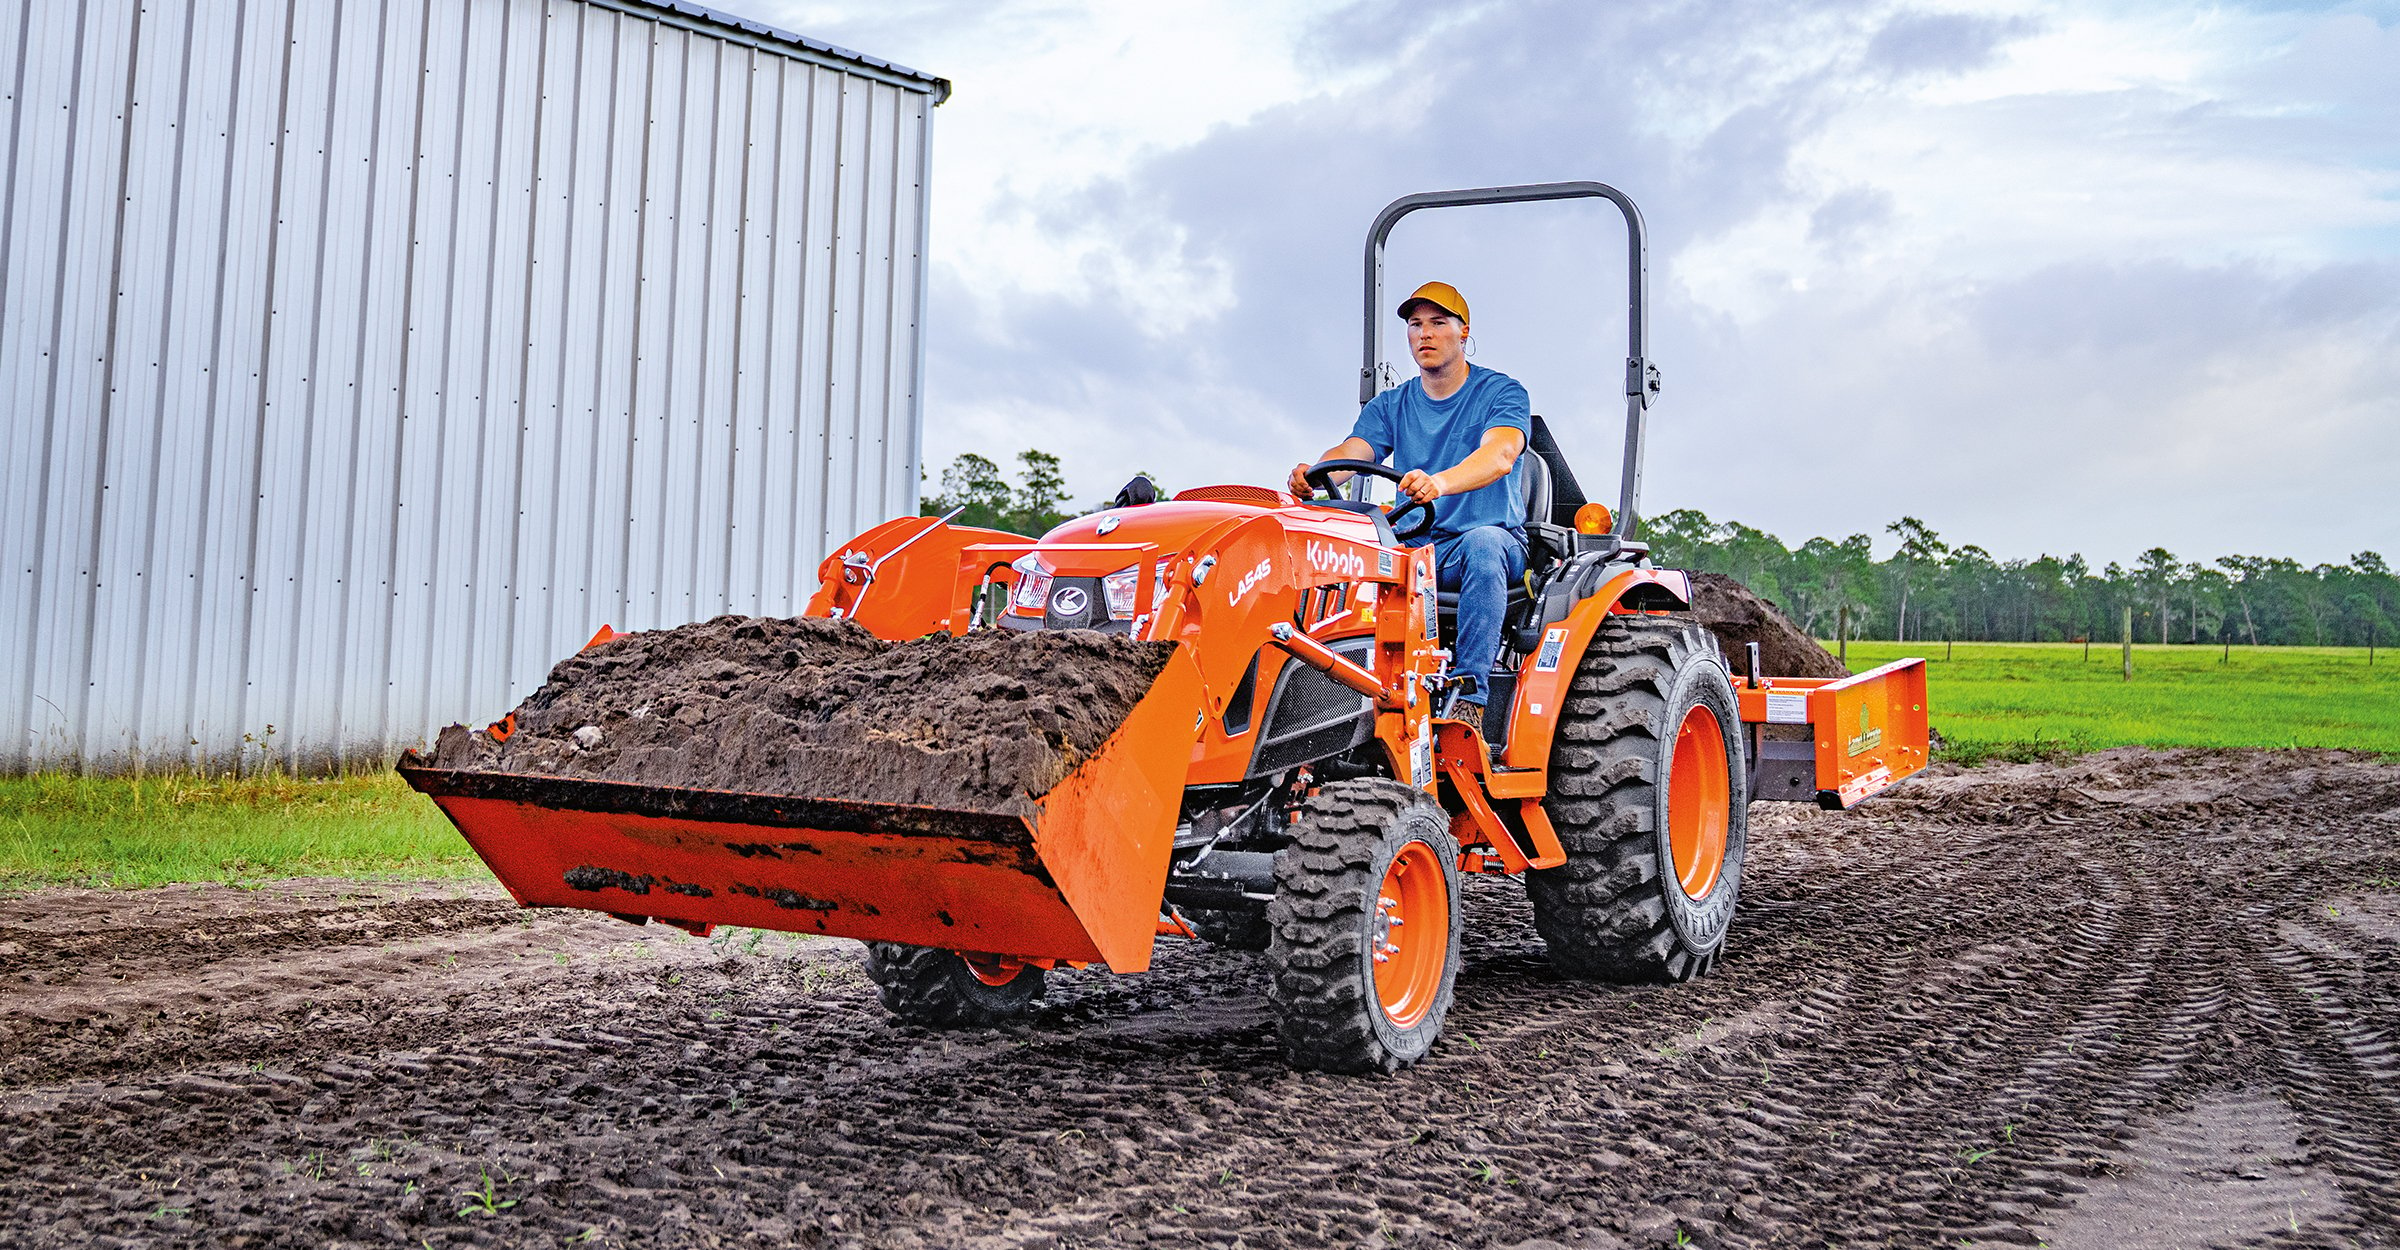 Getting the Most out of Your Compact Tractor